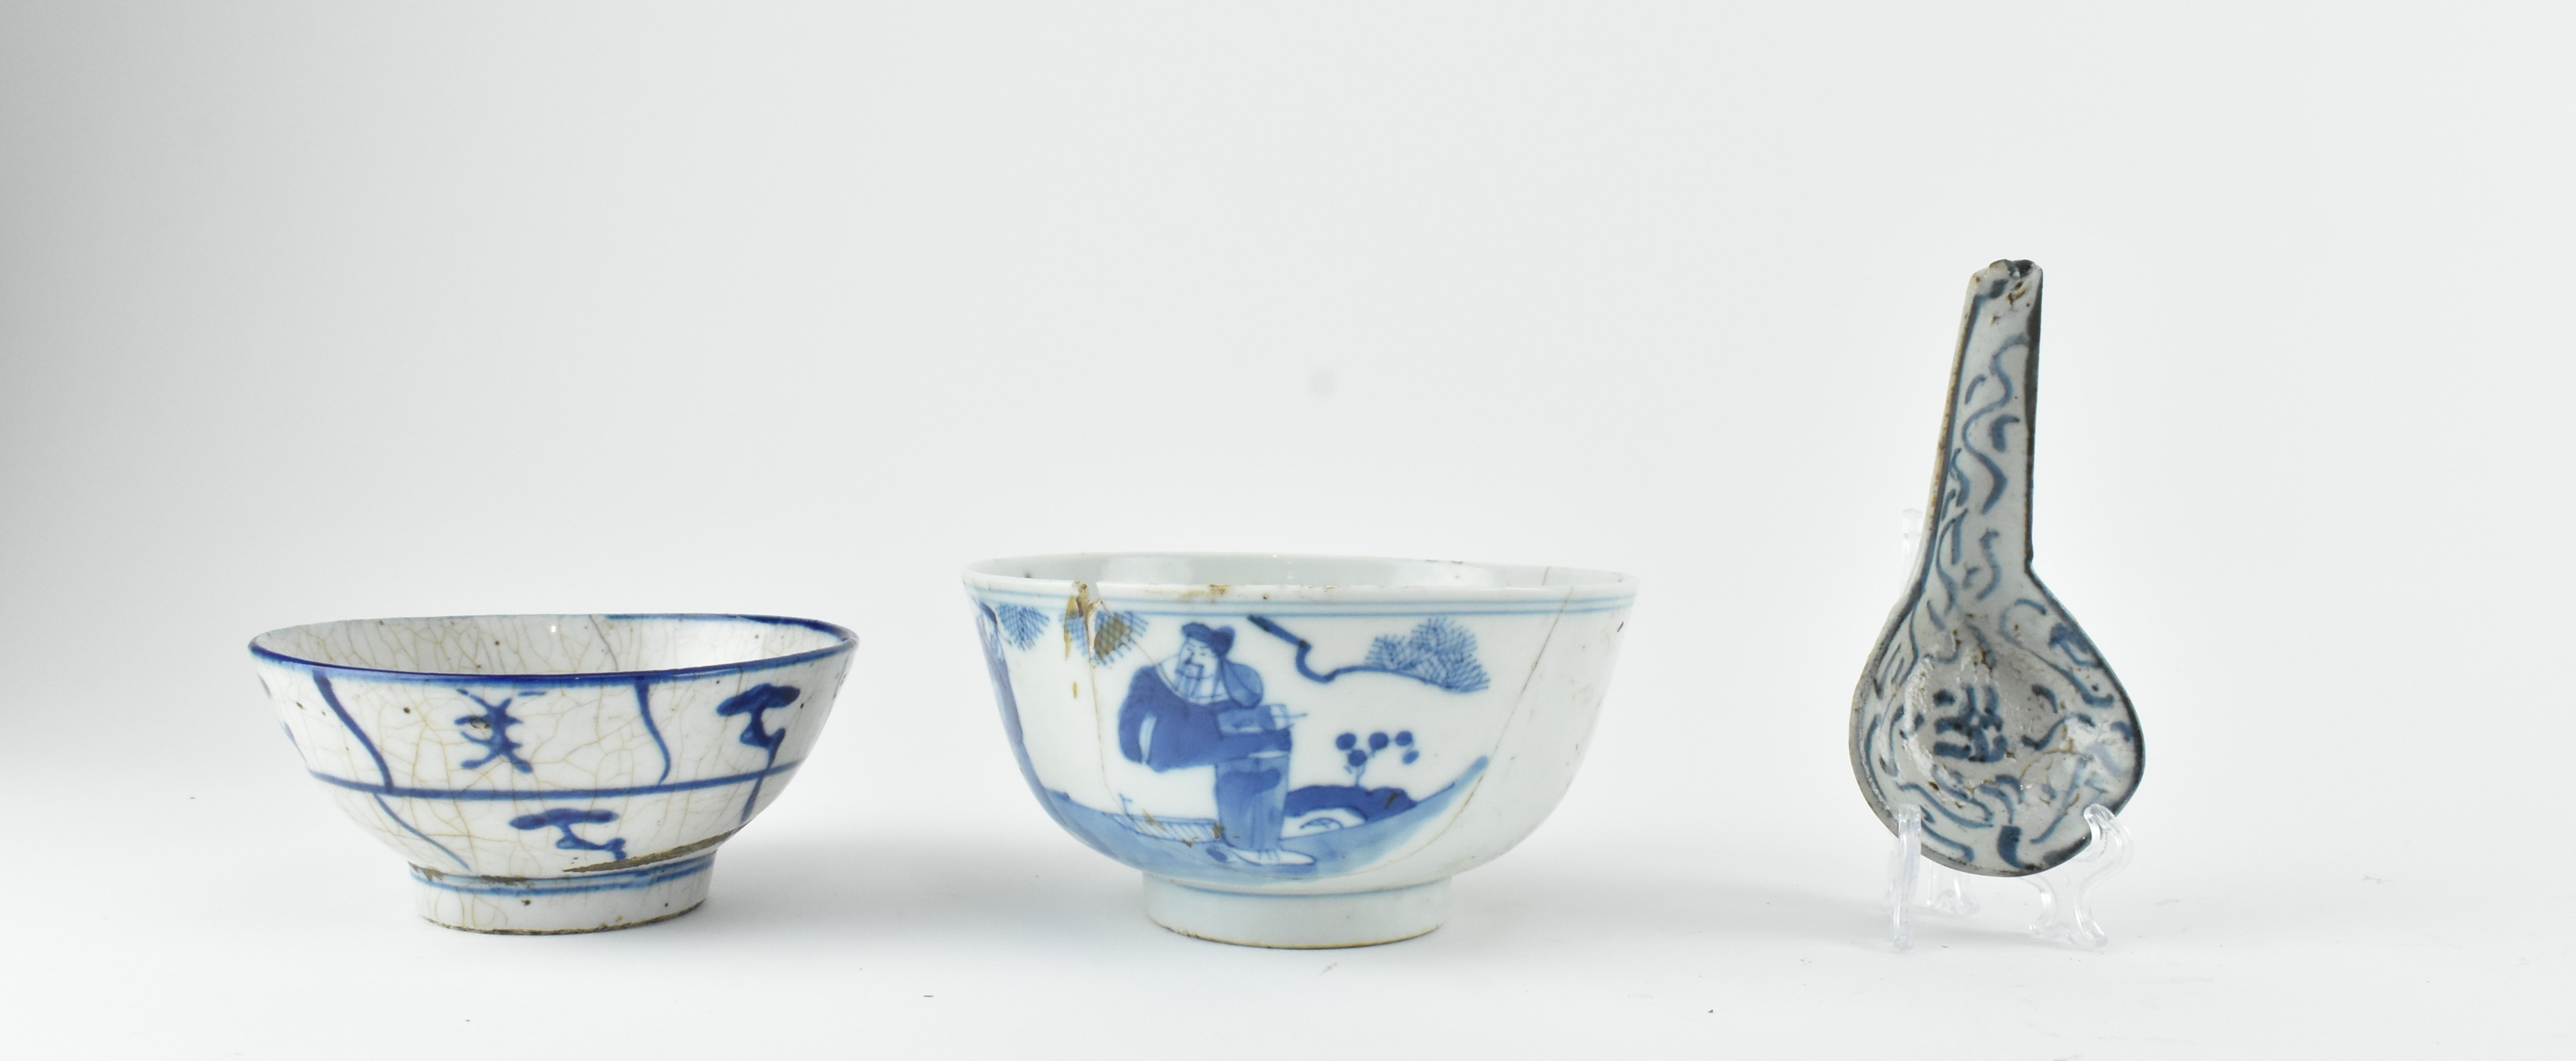 GROUP OF SIX QING DYNASTY CERAMIC ITEMS 清 陶瓷六件 - Image 5 of 7